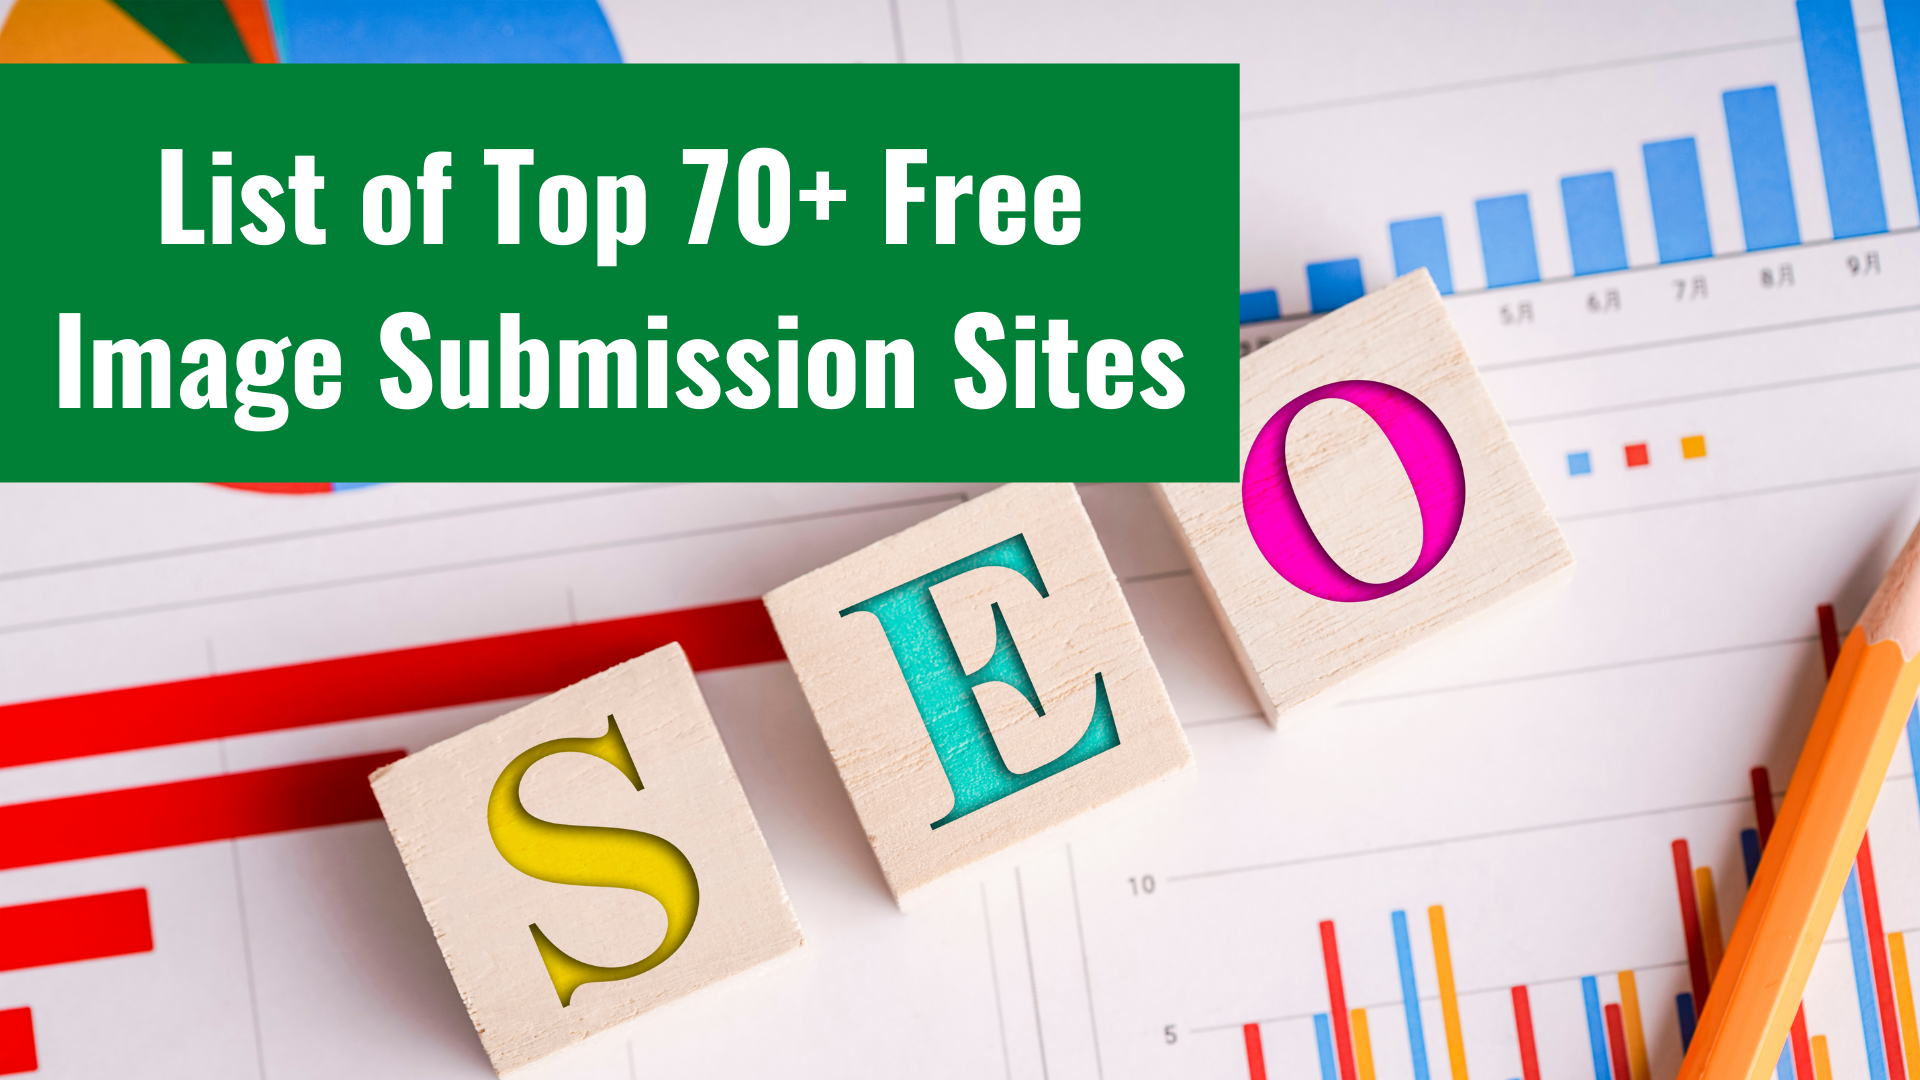 List of Top 70+ Free Image Submission Sites